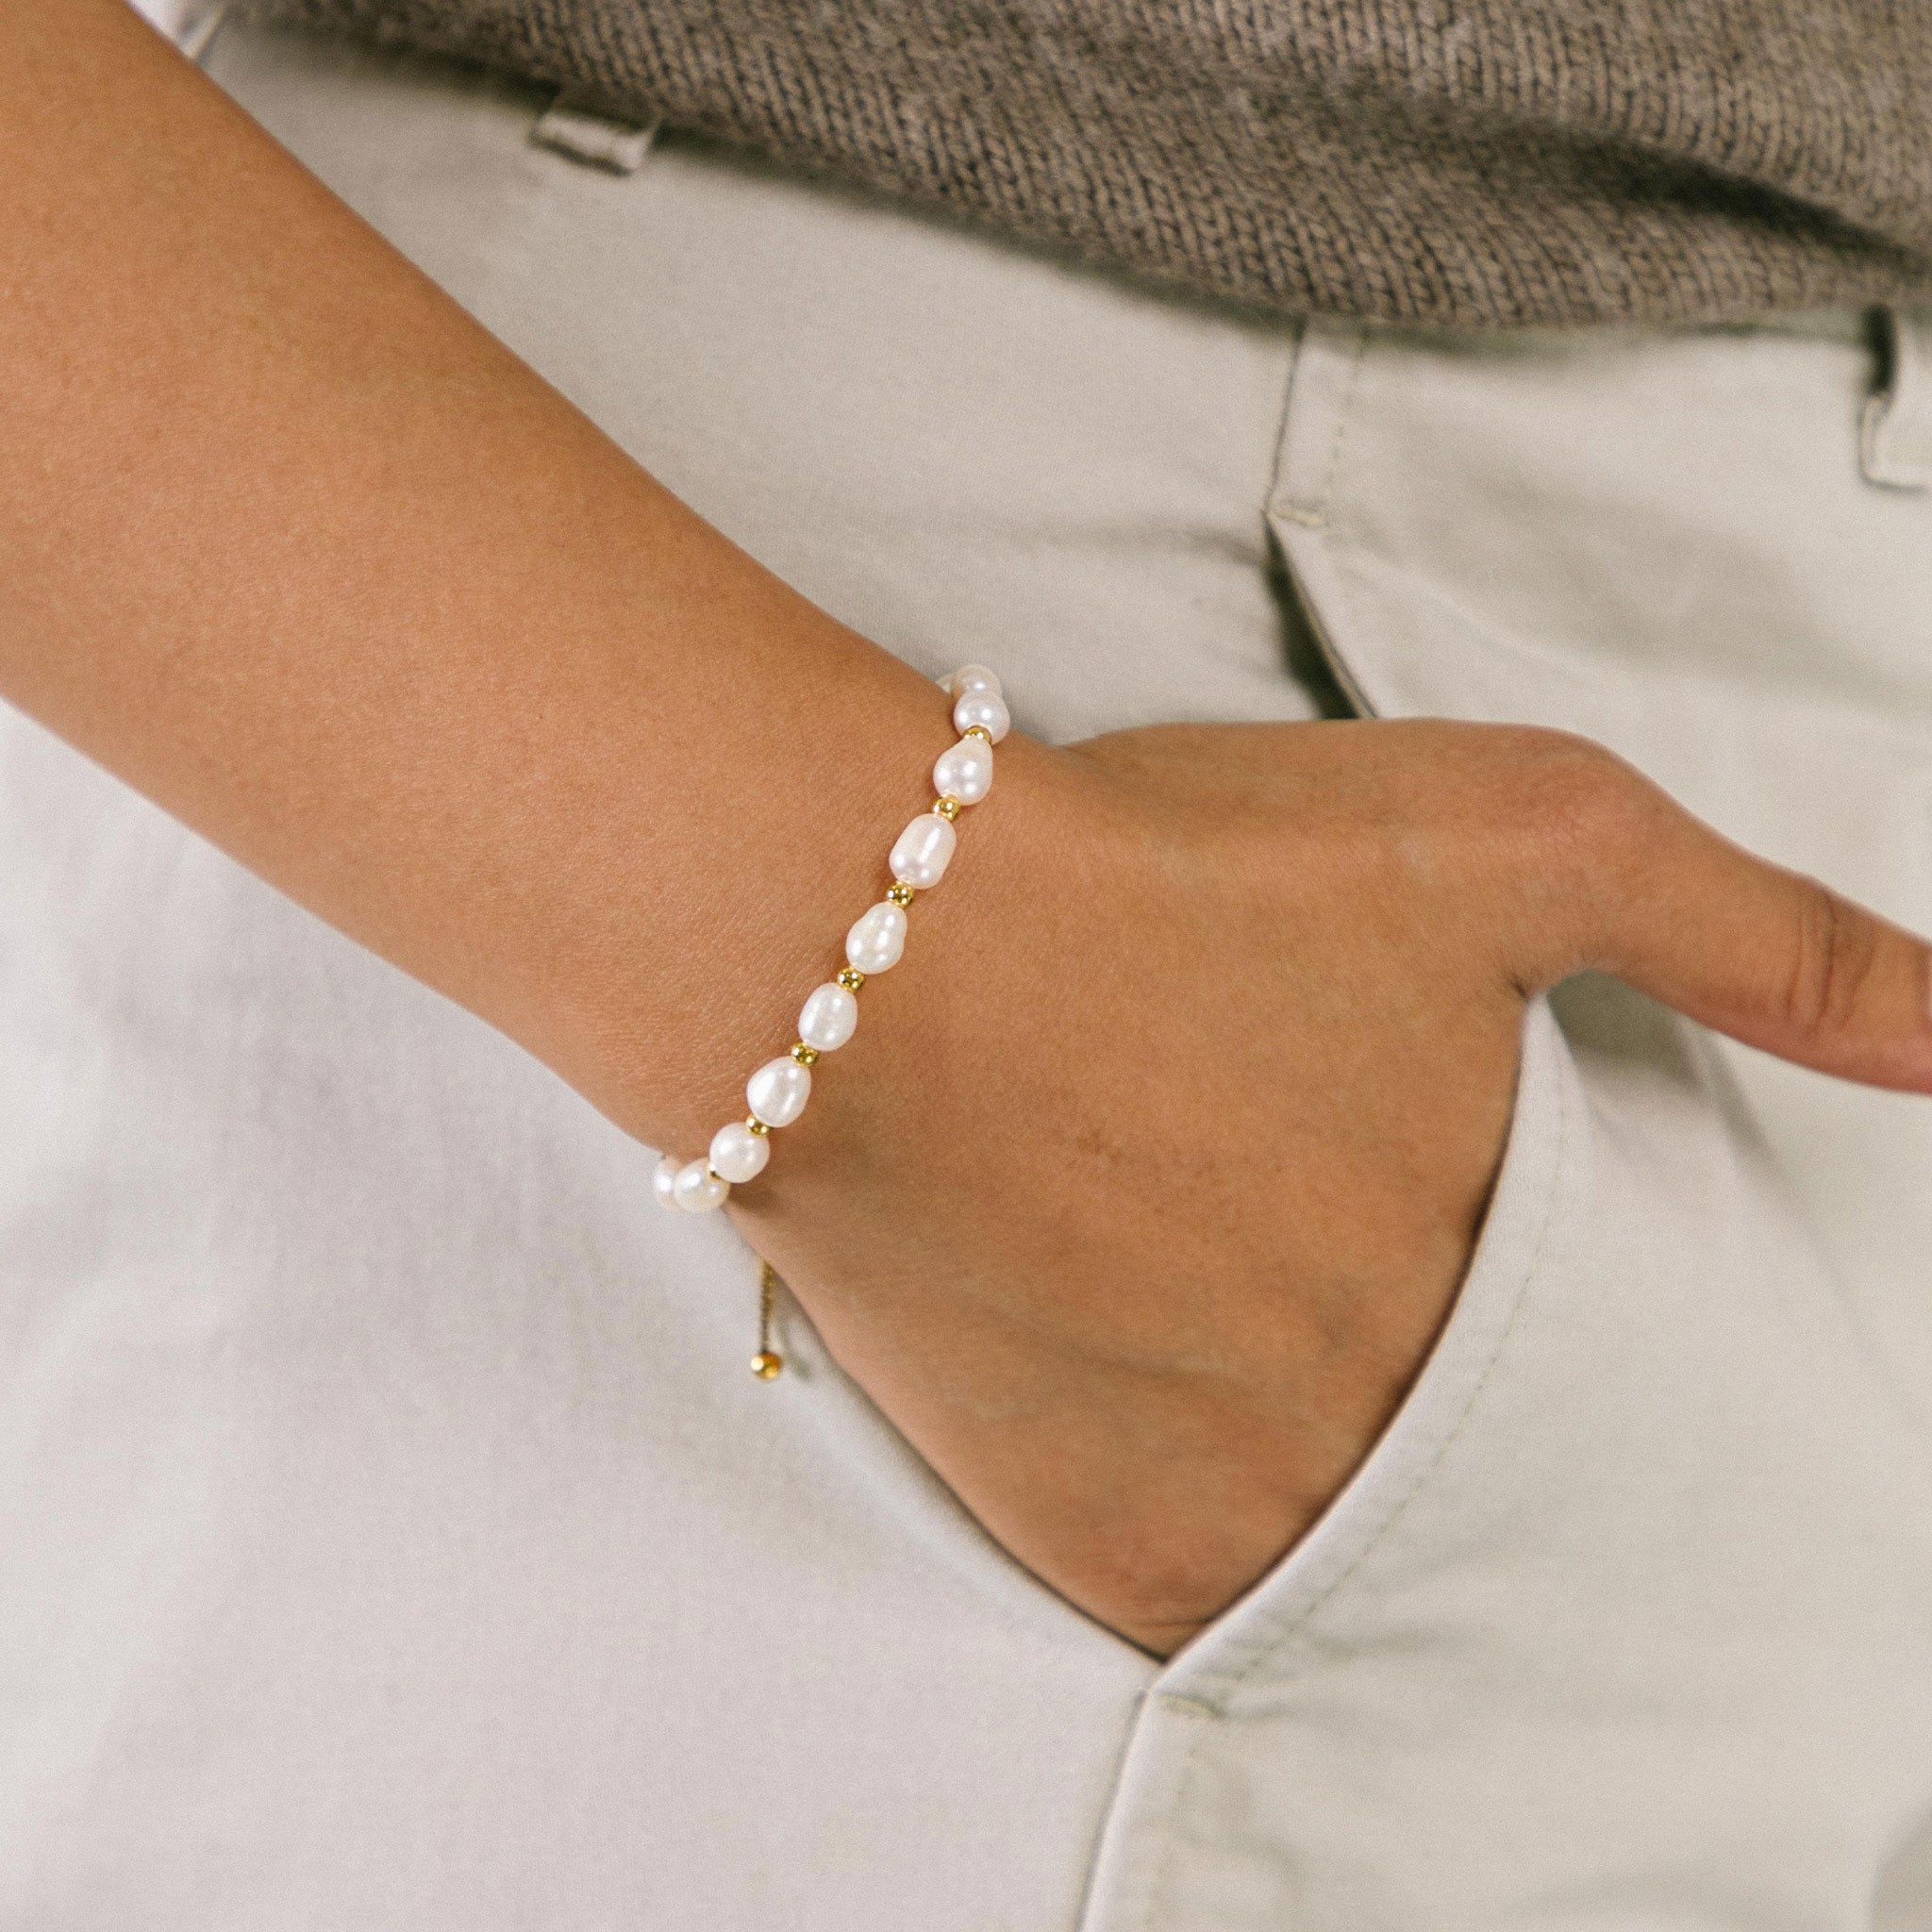 A model wearing the Emi Pearl Bracelet is crafted from 18K Gold Plated Stainless Steel and Freshwater Pearls, allowing for a small degree of variation in size and hue. The bracelet is water-resistant and hypoallergenic.